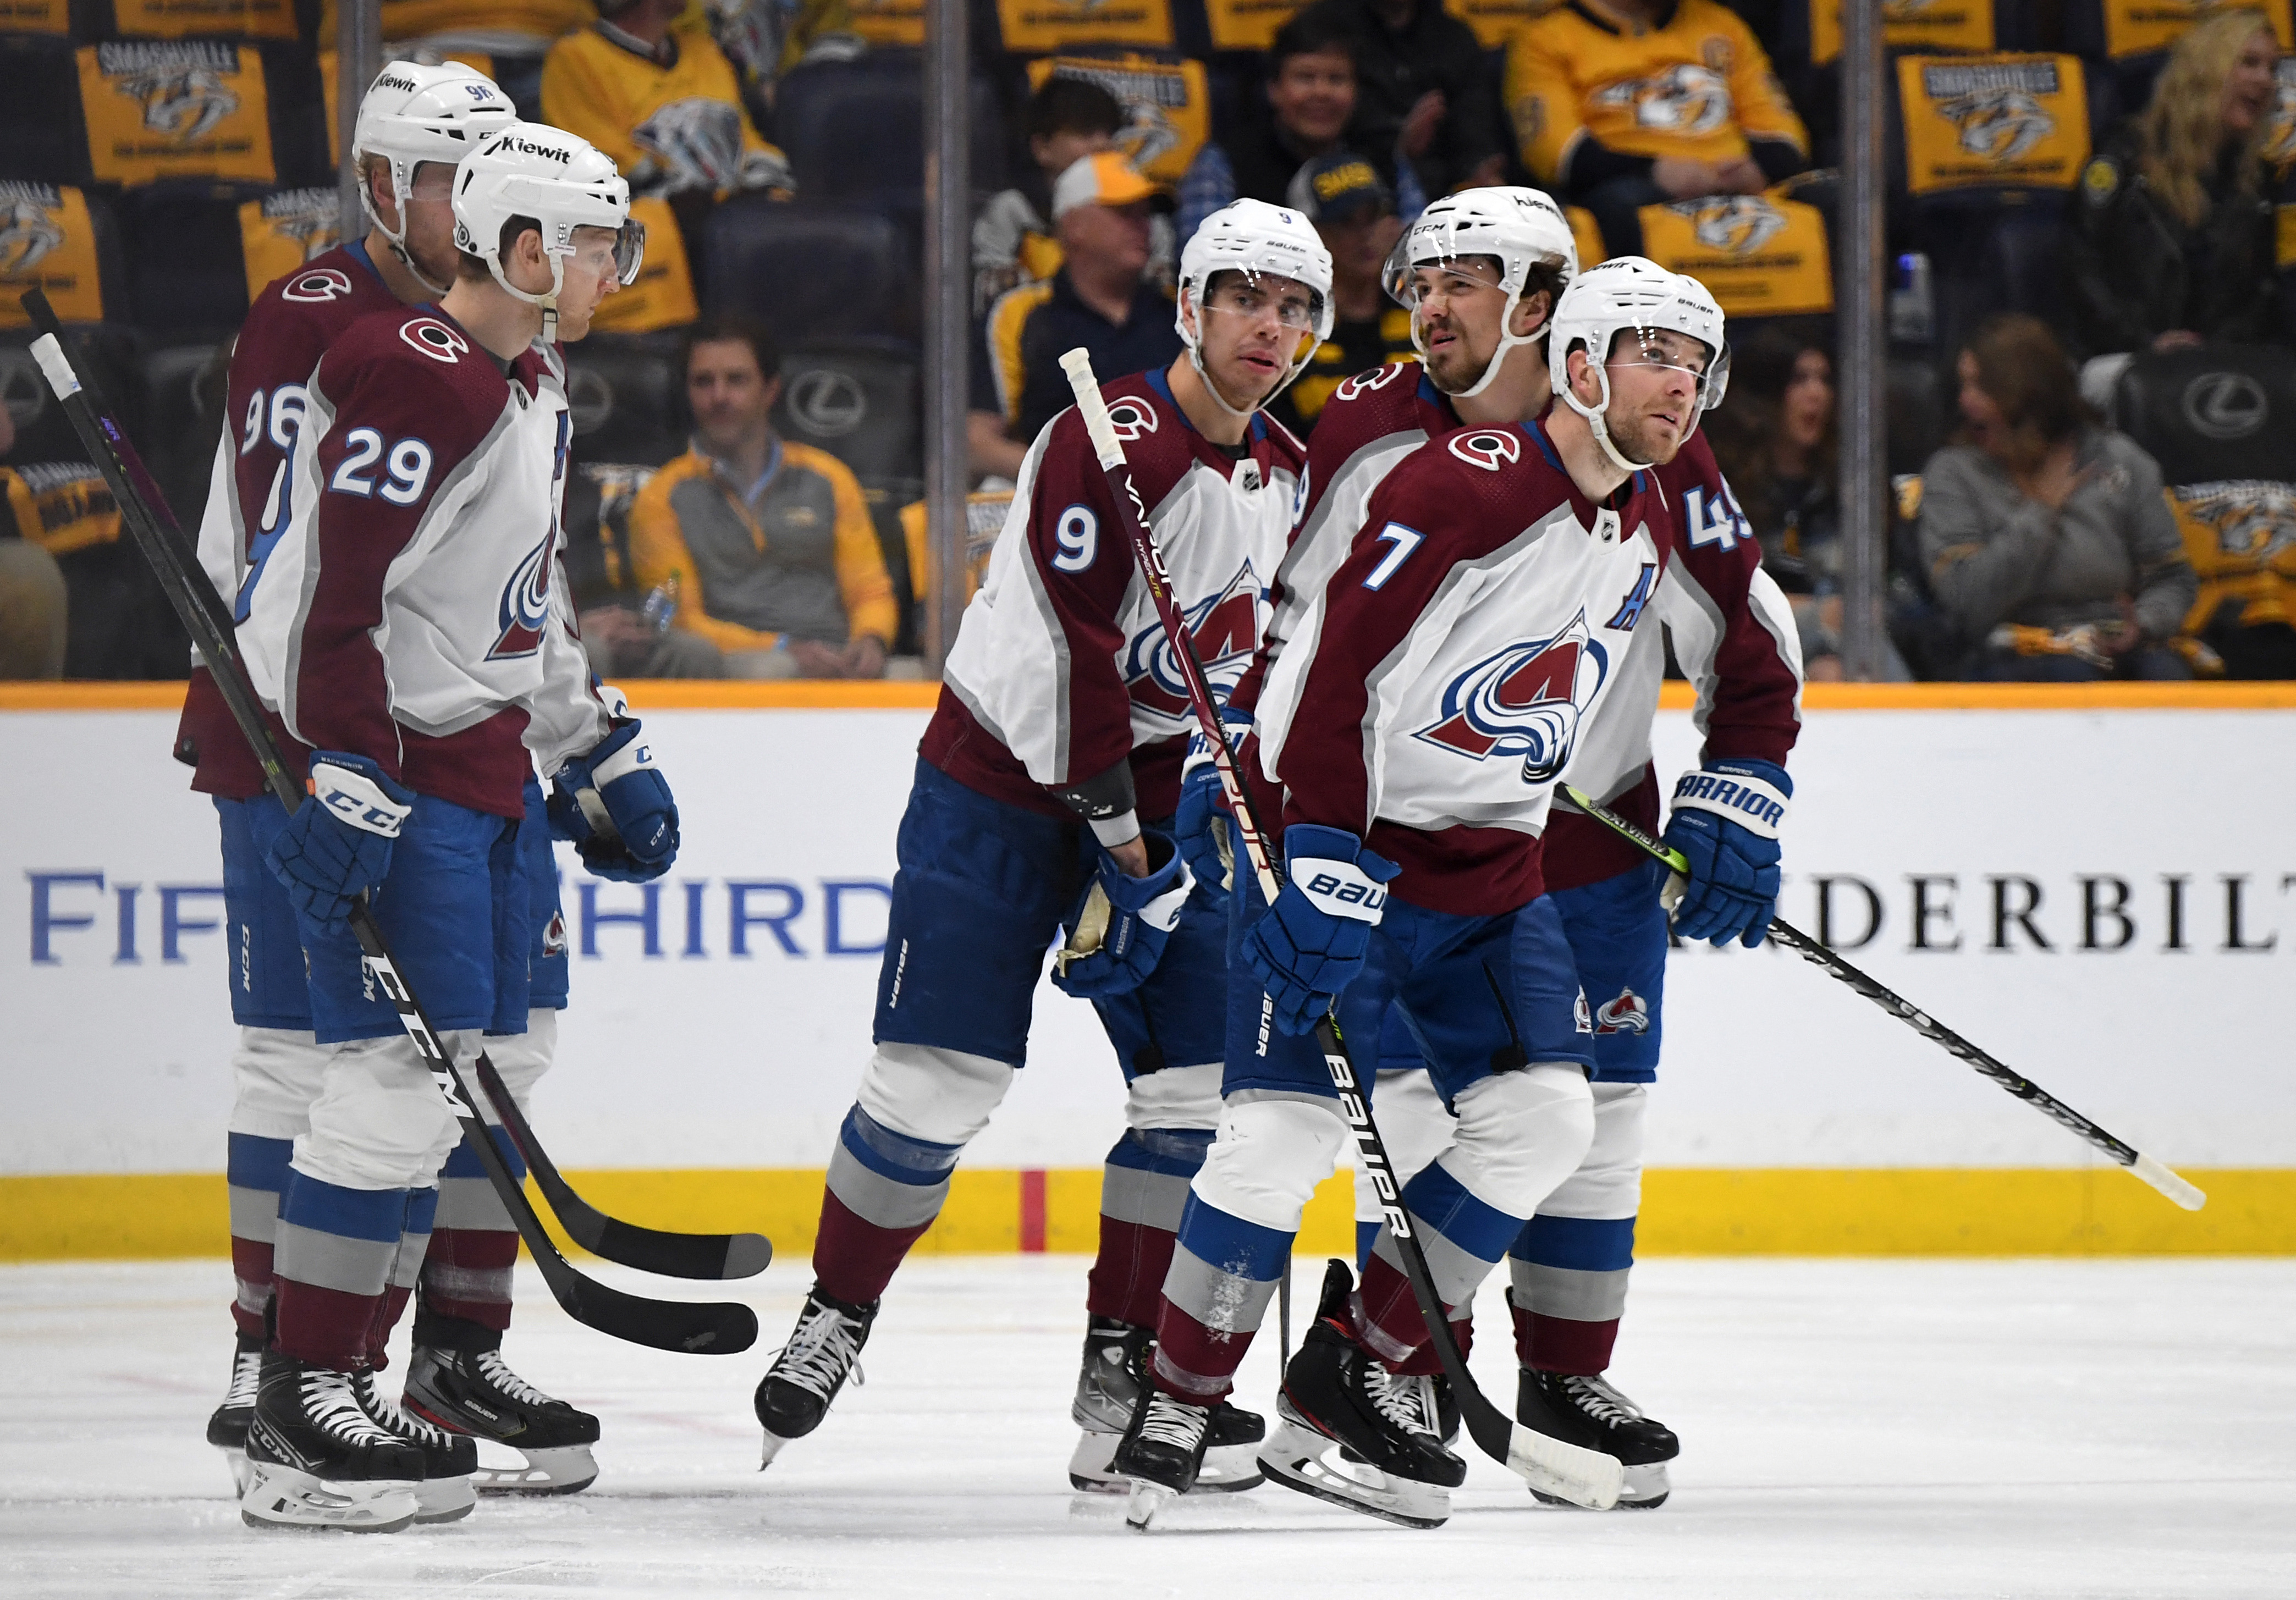 Nathan MacKinnon capped off hat trick for Avs with sensational goal